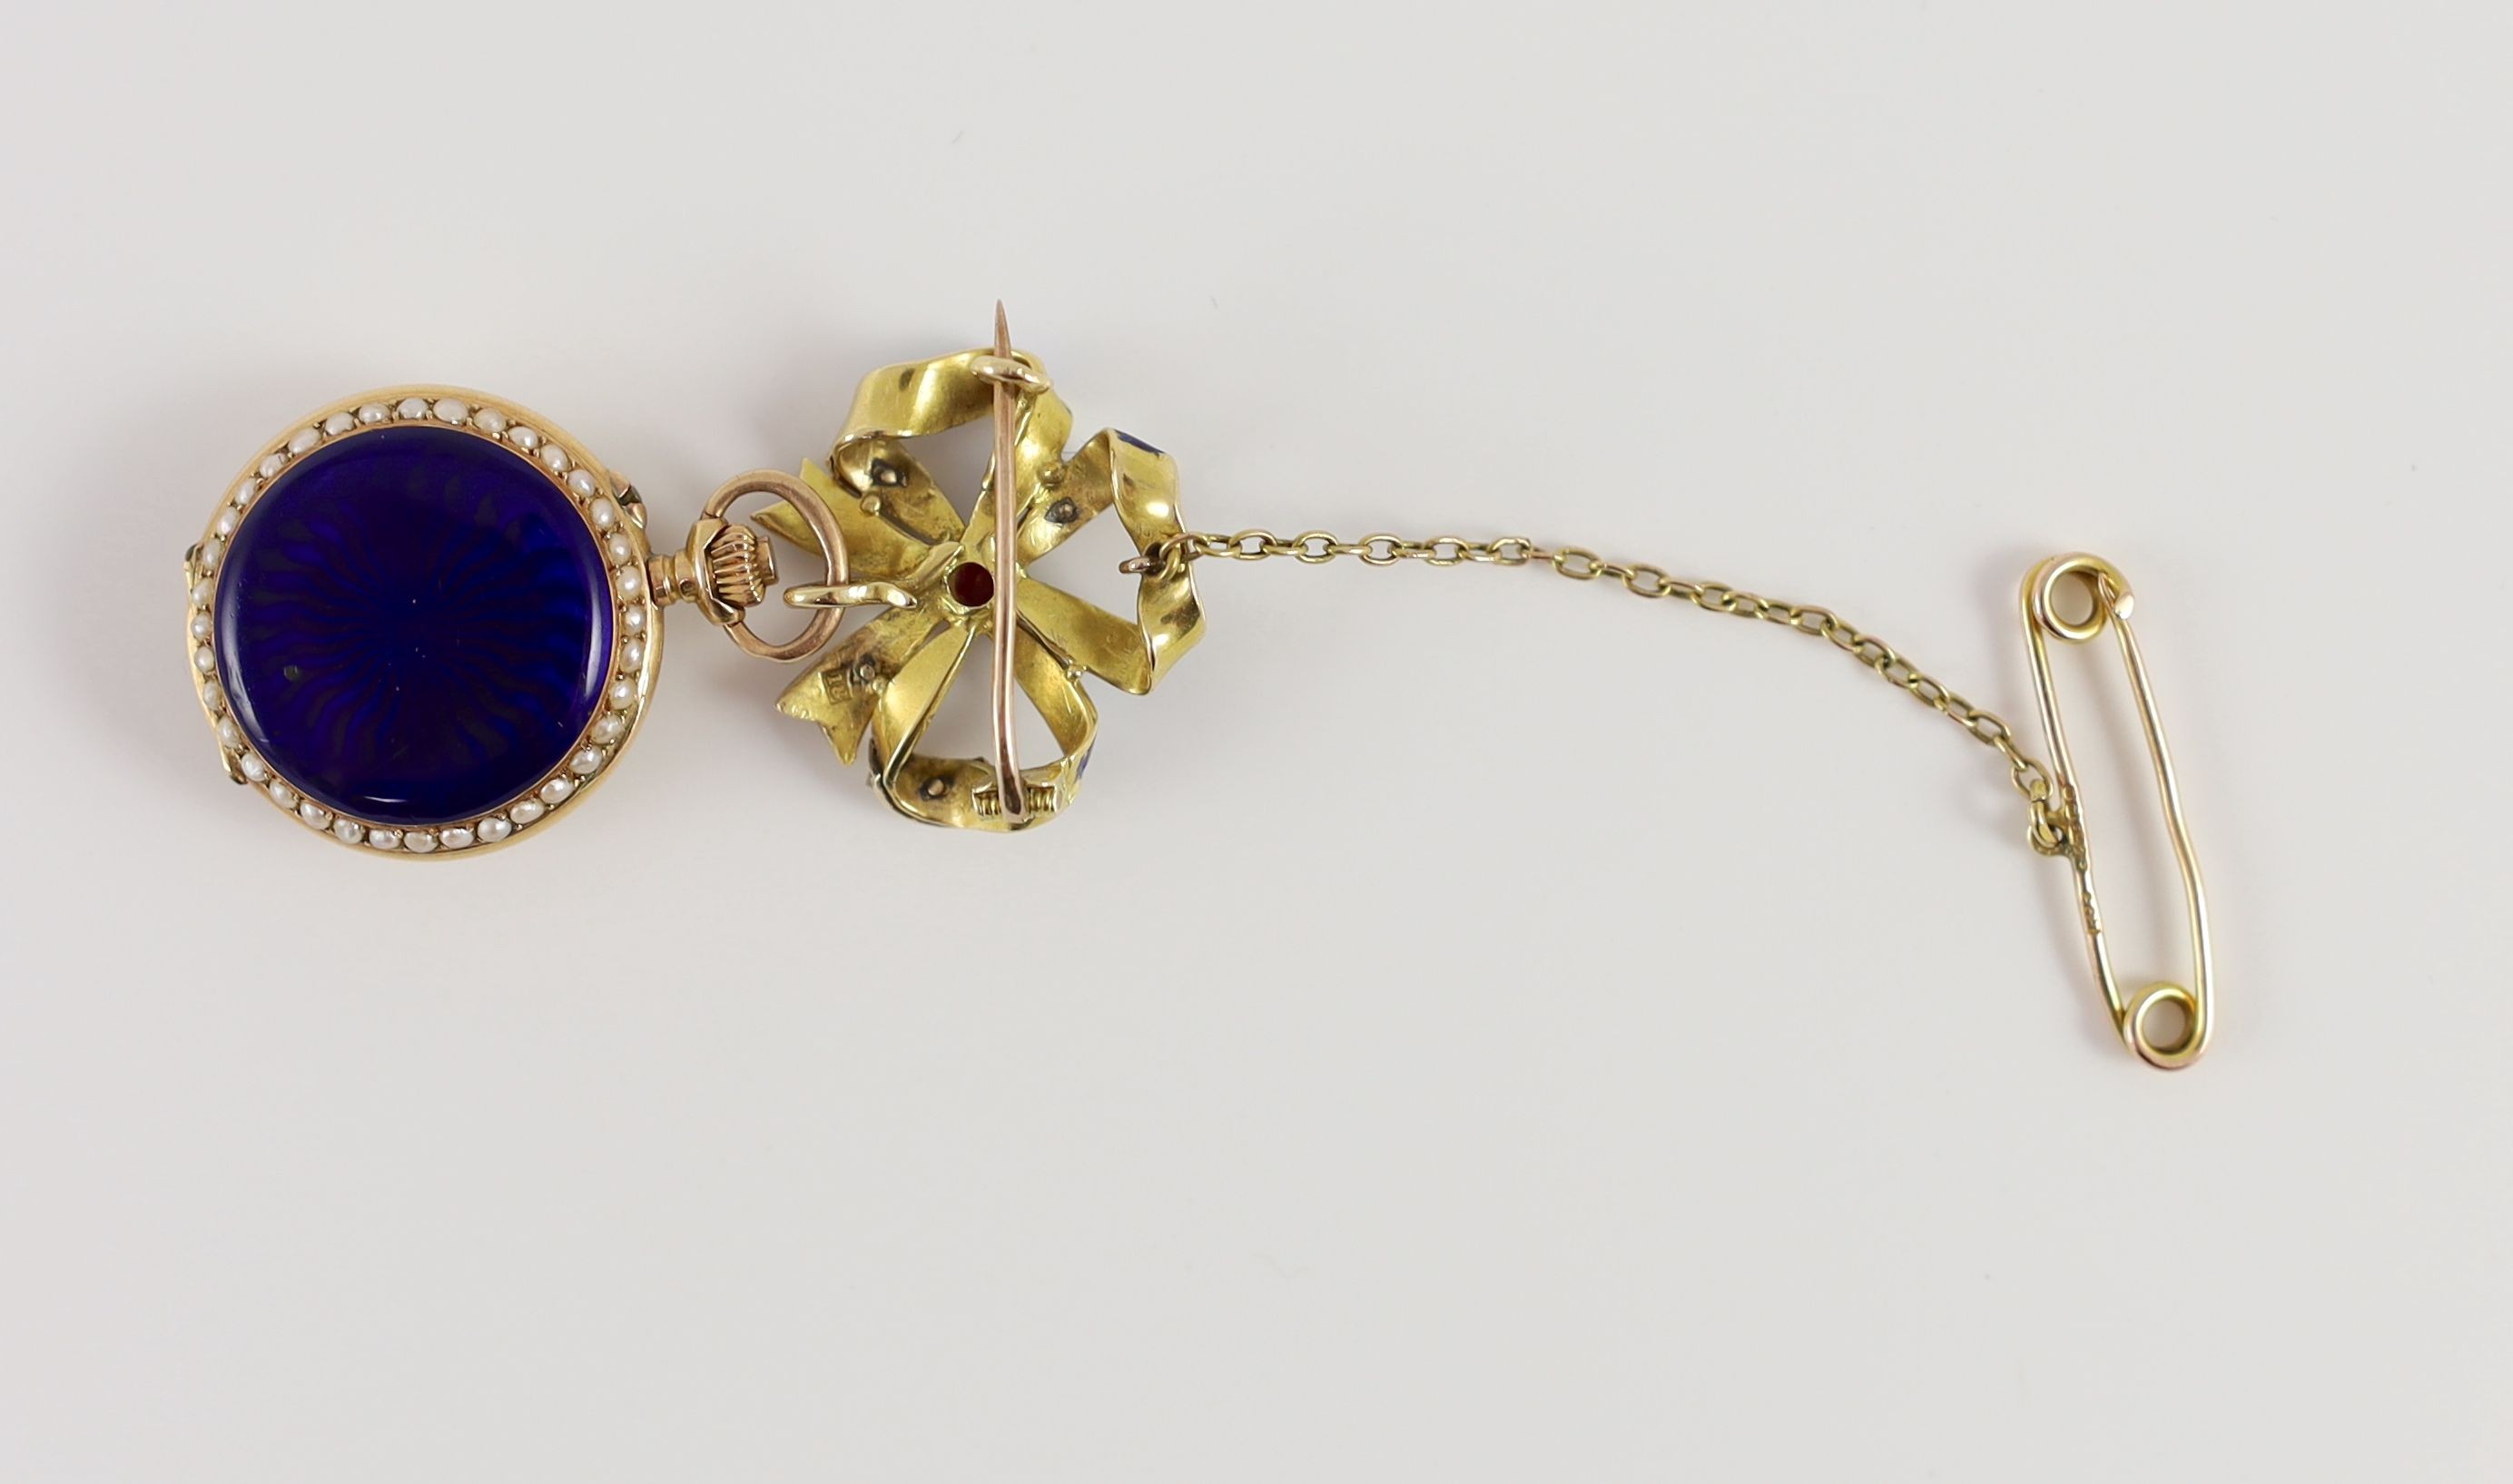 A lady's late 19th/early 20th century Swiss 18ct gold, enamel, split pearl and diamond set fob watch, on an associated 18ct gold, enamel, ruby and diamond set ribbon bow suspension brooch